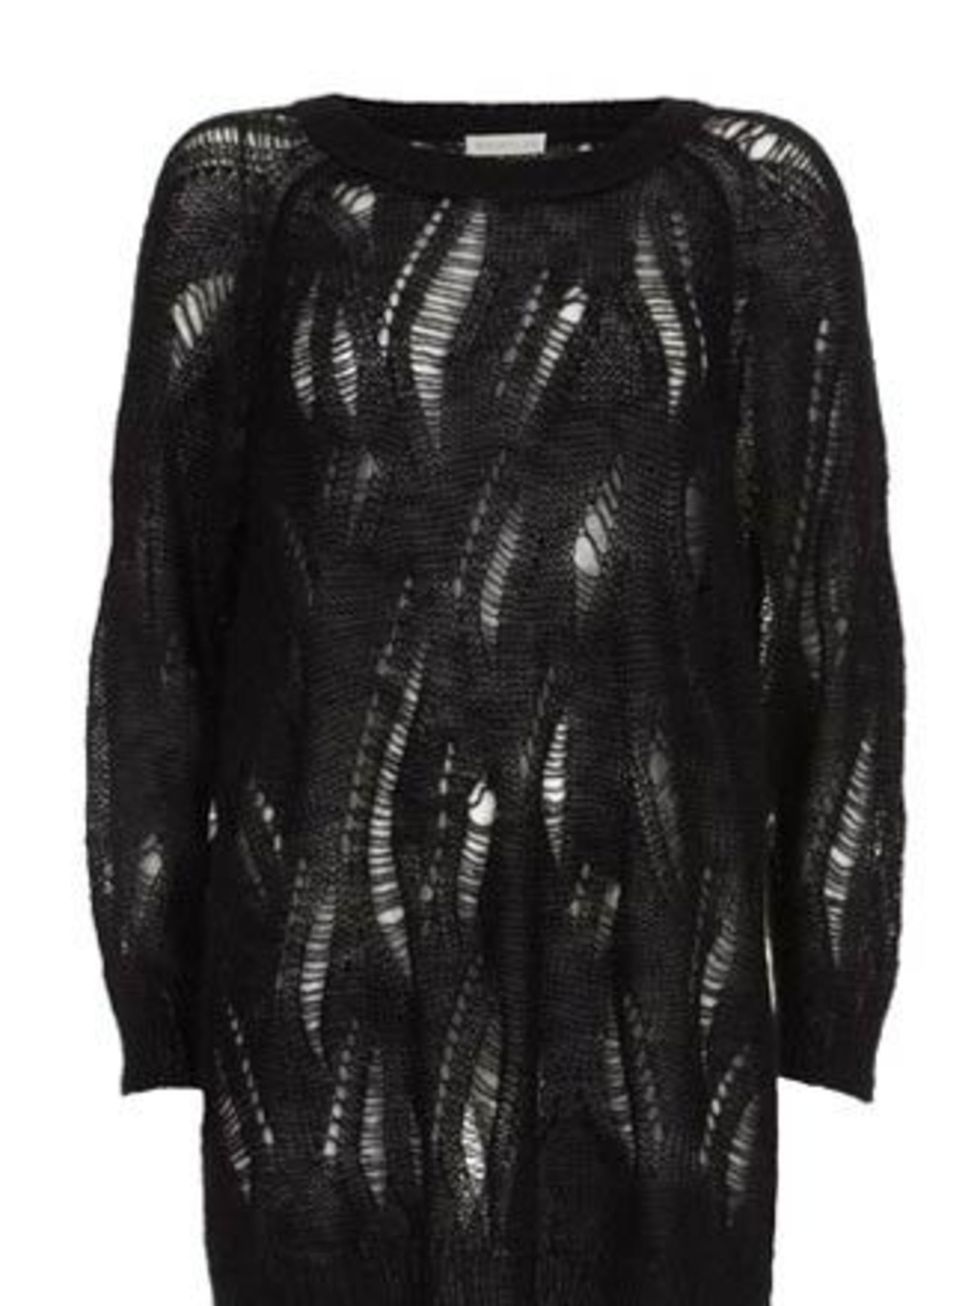 <p>Jumper, £110 by <a href="http://www.whistles.co.uk/fcp/product/whistles/newin/Punky-Ladder-Jumper/903000053506">Whistles</a></p>